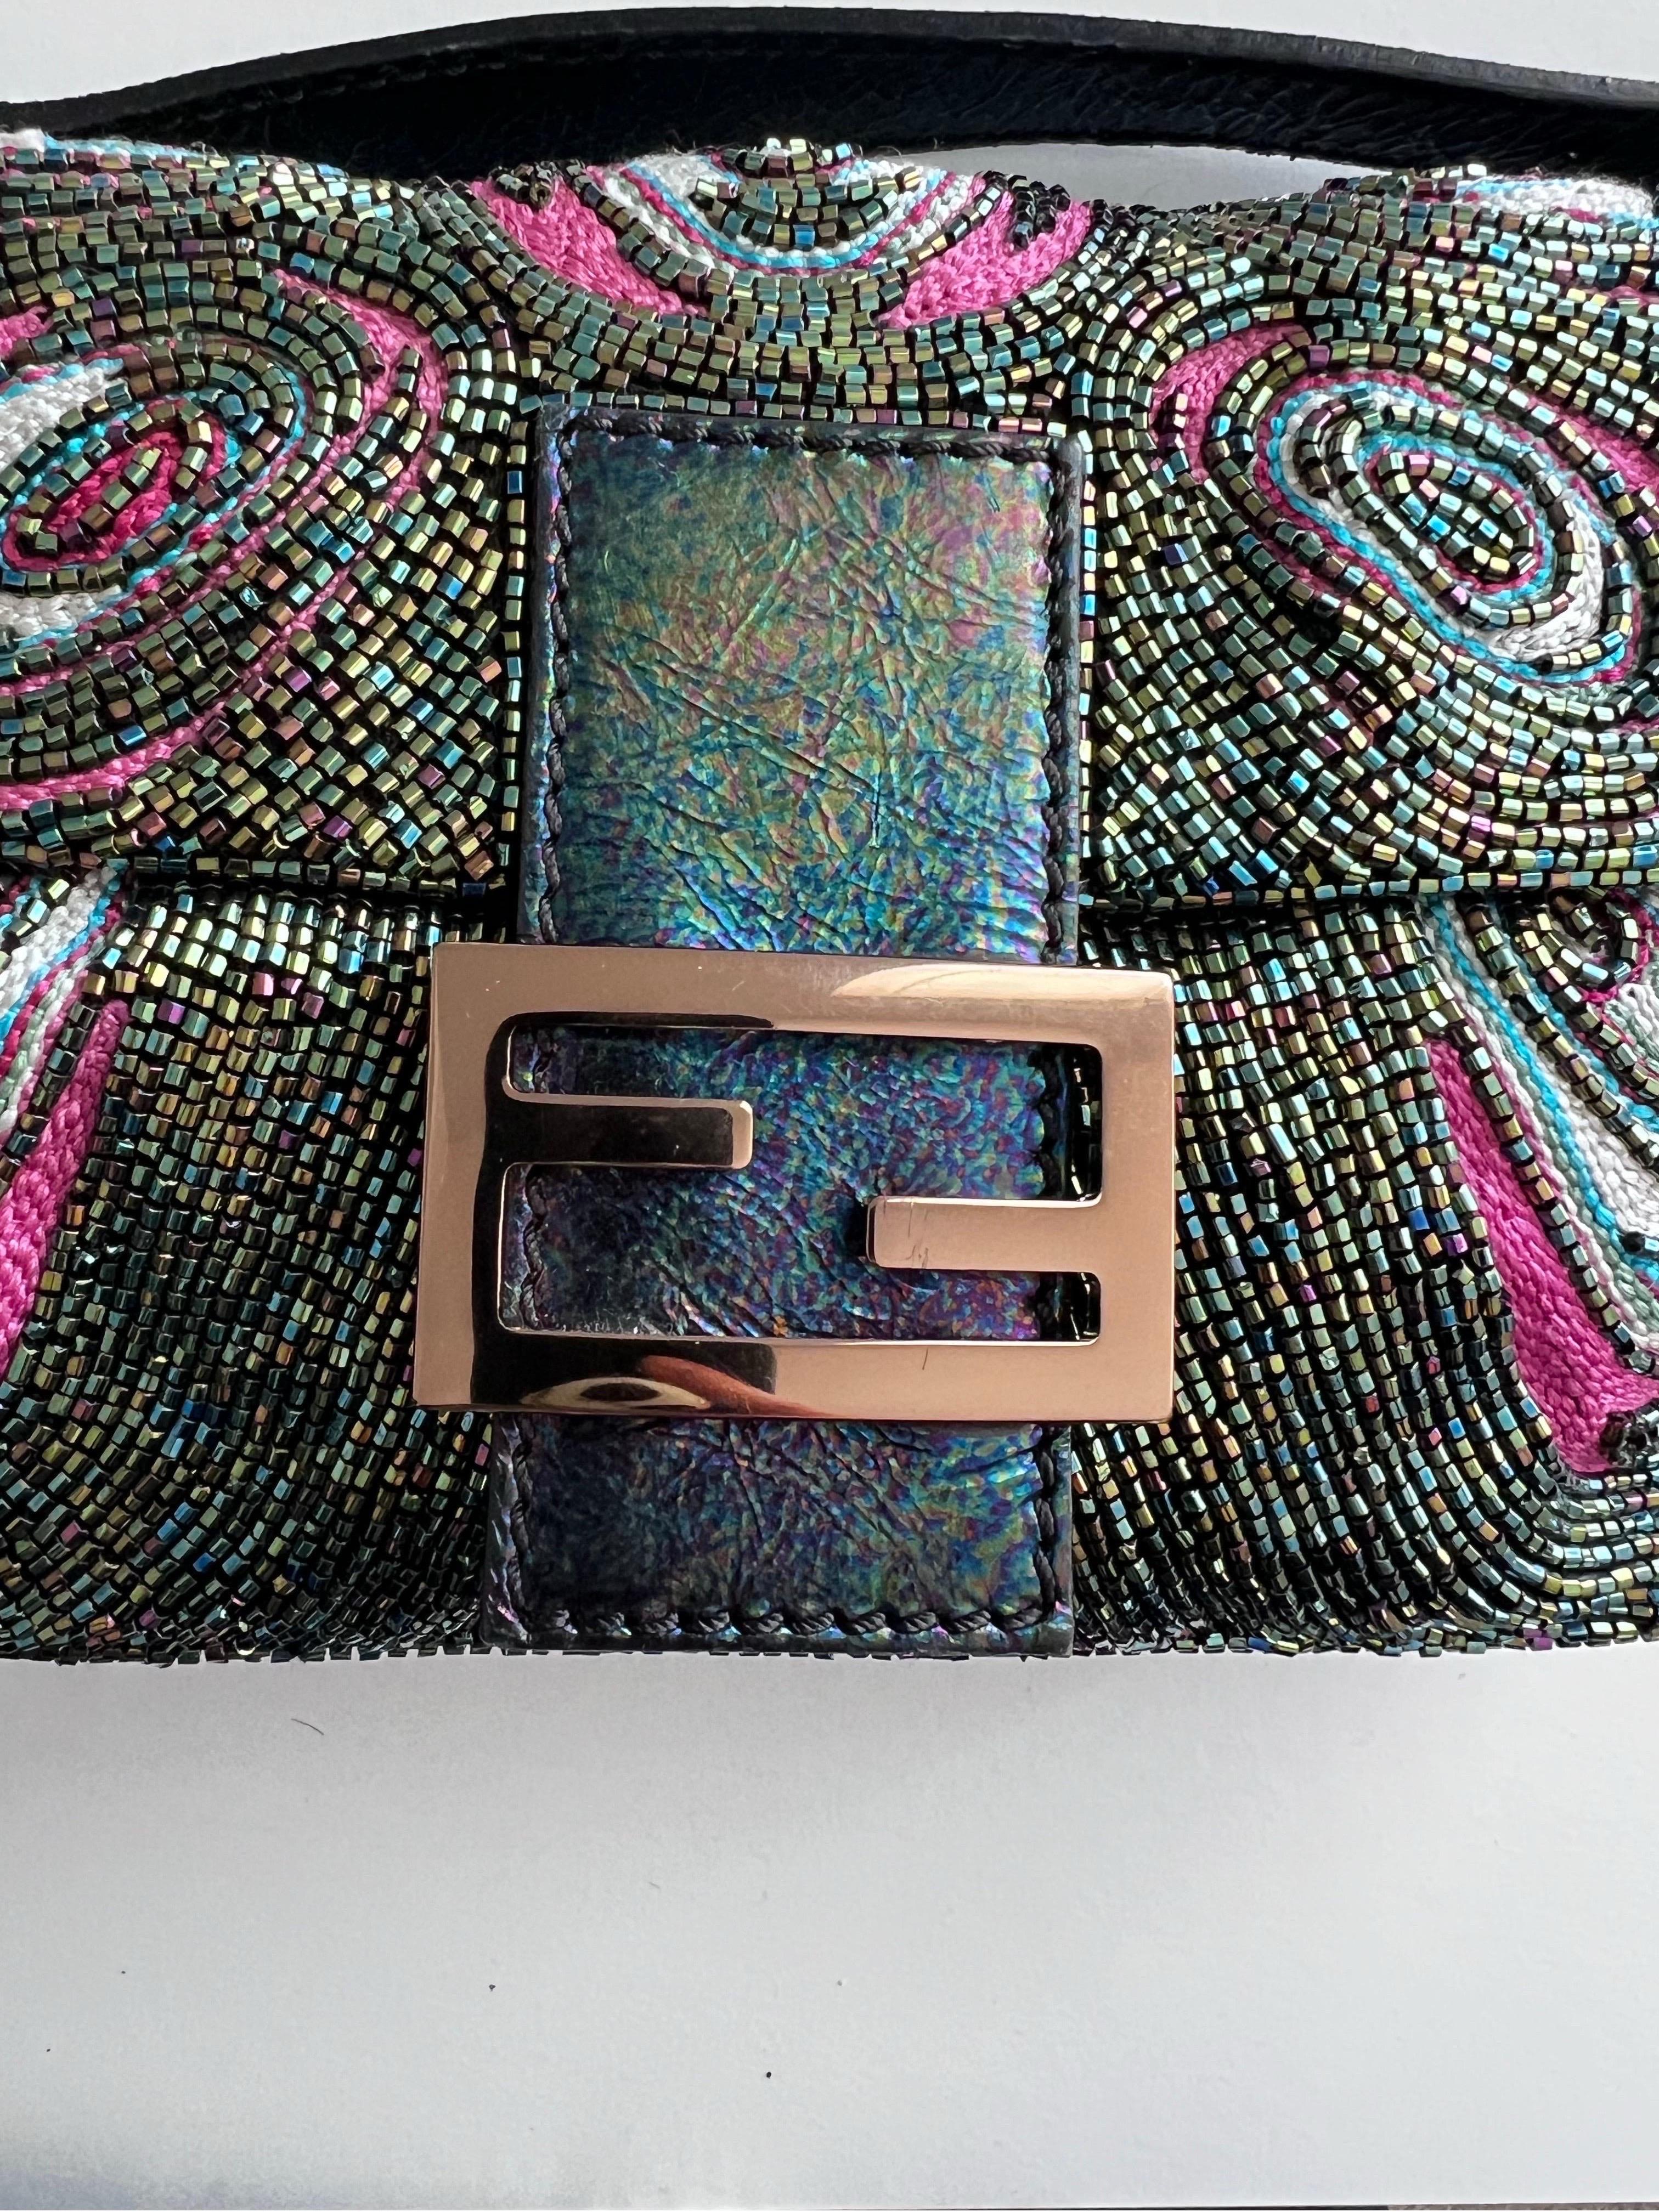 FENDI Peacock Leather Pattern Beaded Baguette In Excellent Condition For Sale In Aurora, IL